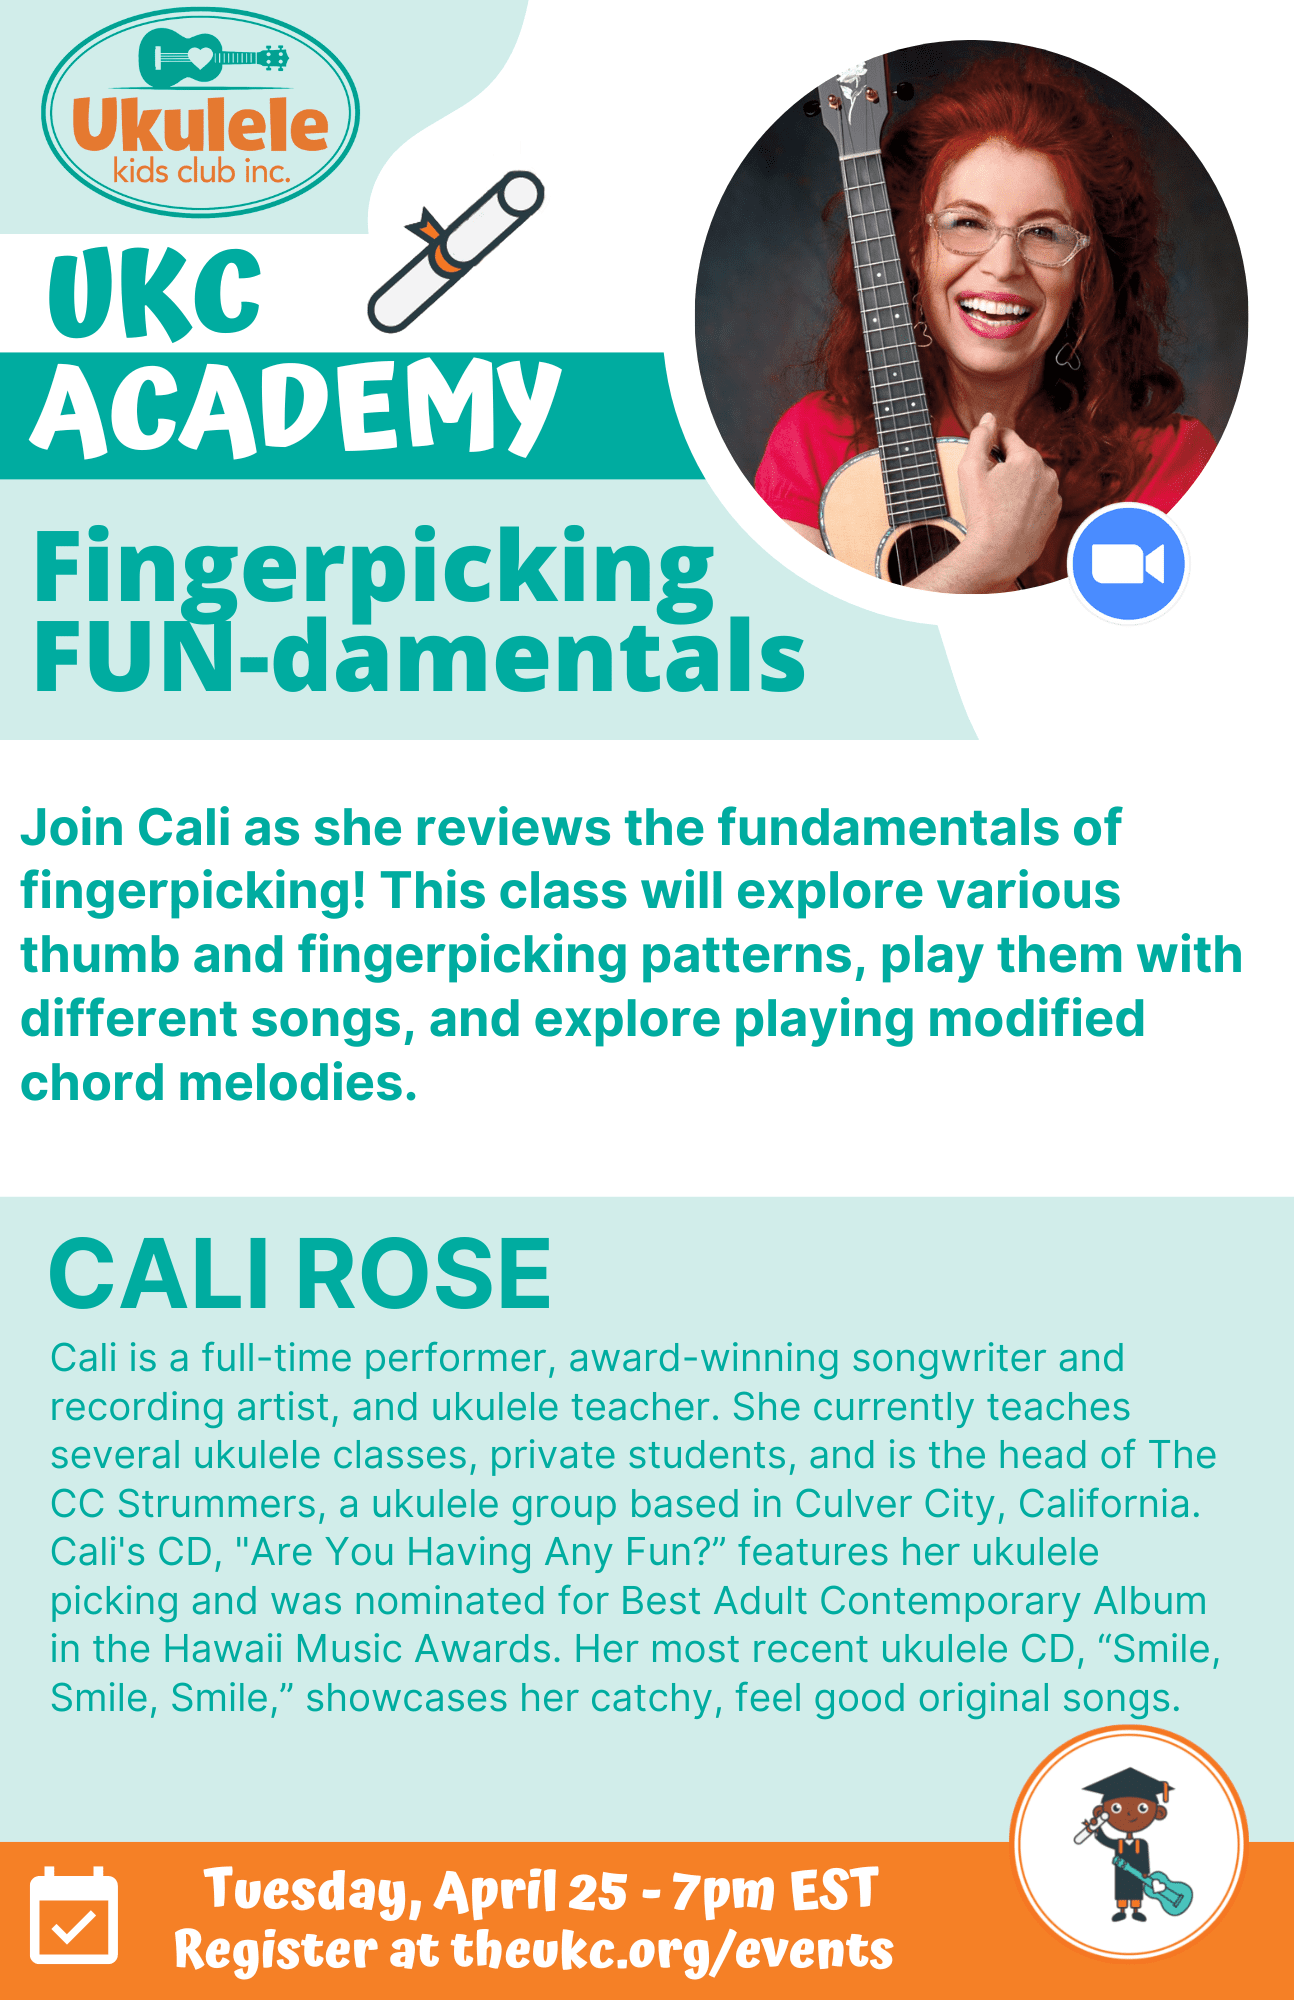 UKC Academy Fingerpicking FUN-damentals event flyer features a photo of Cali Rose and event details